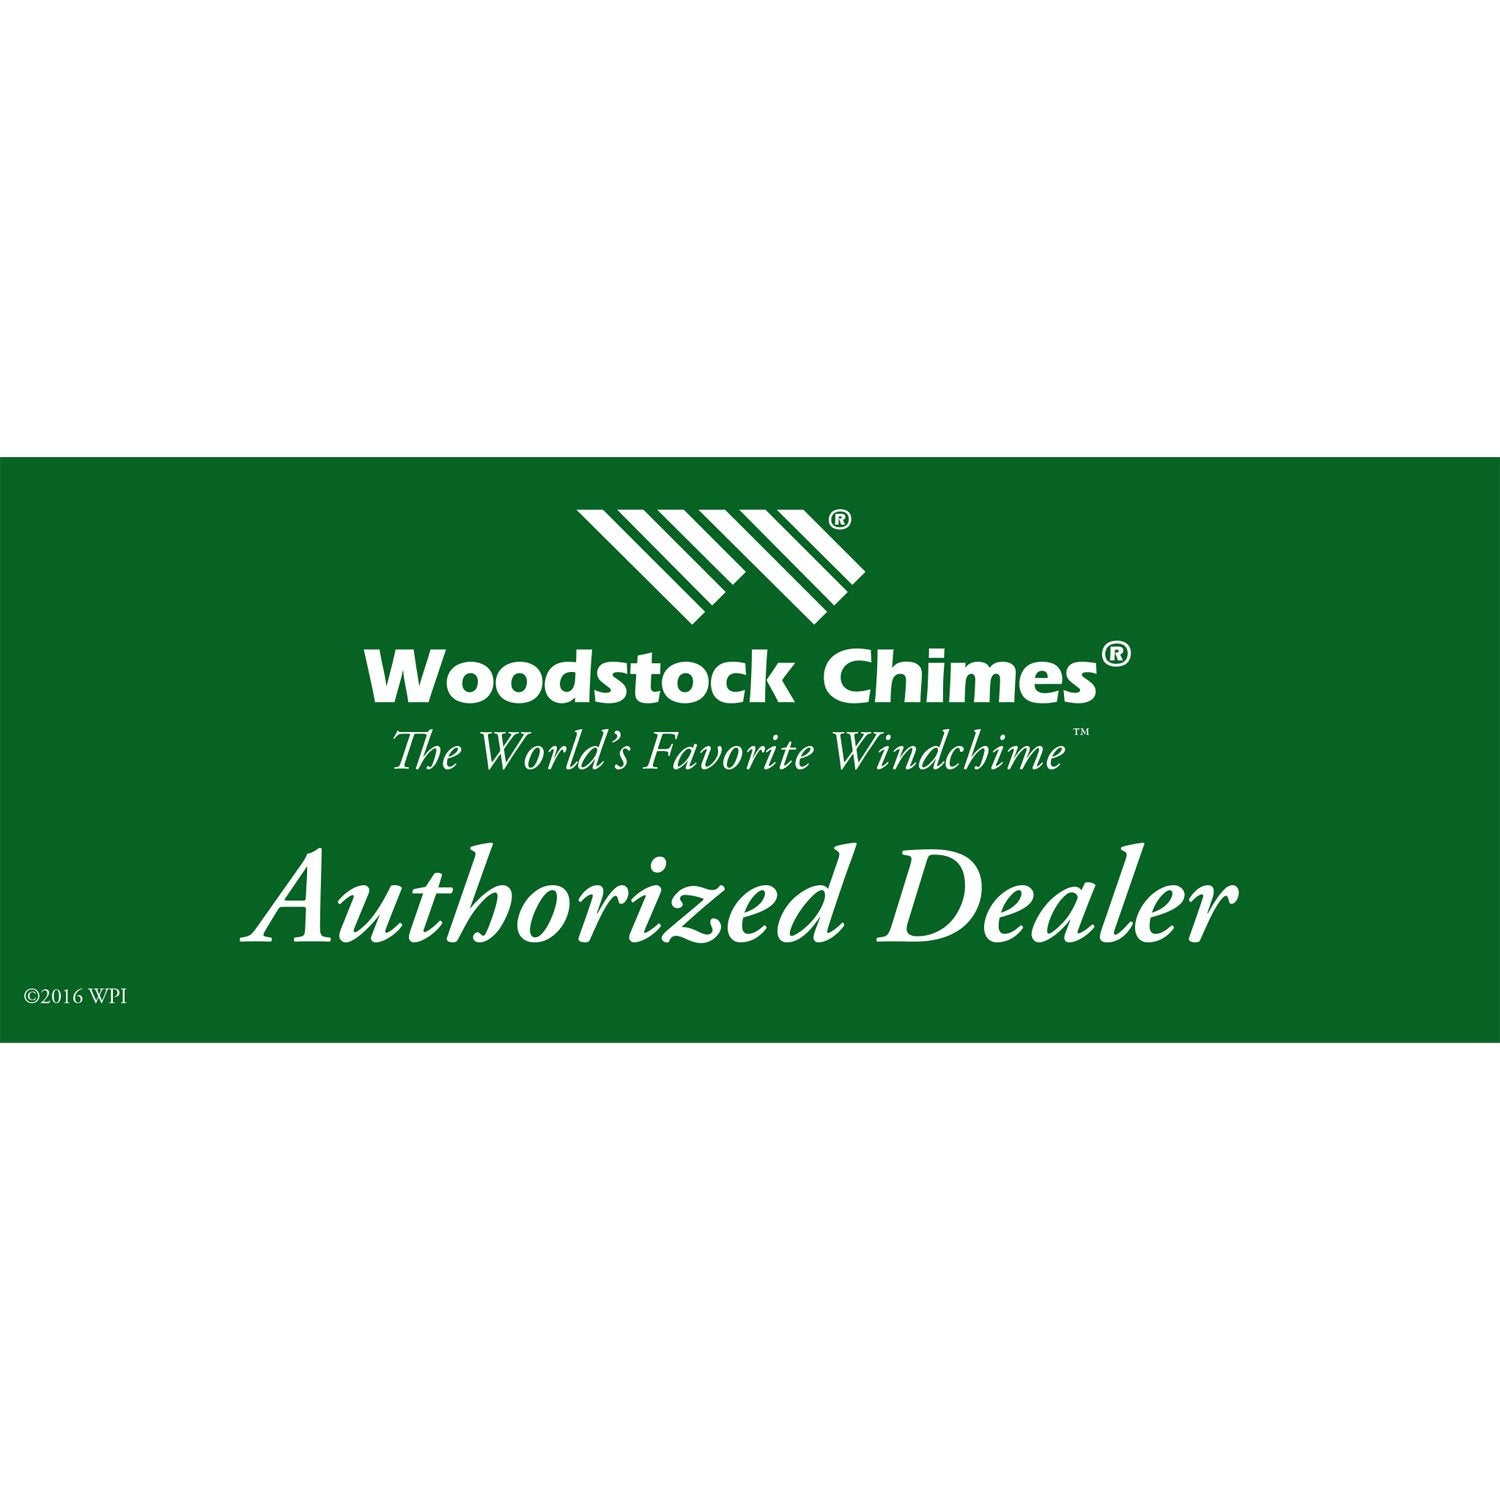 Authorized Dealer Window Cling Sign main image